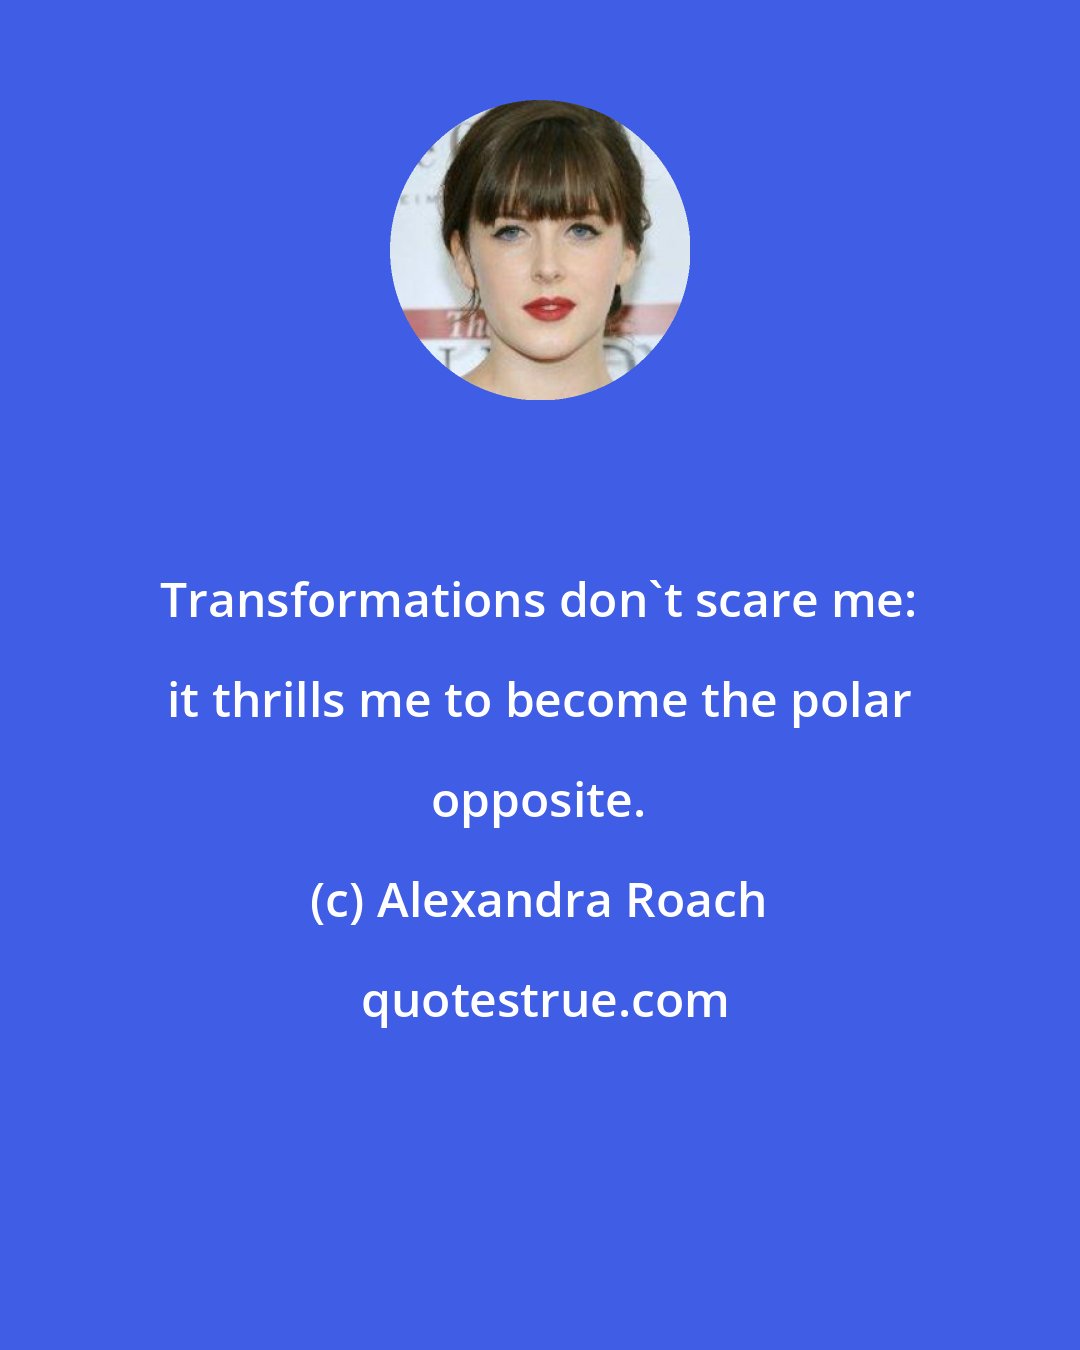 Alexandra Roach: Transformations don't scare me: it thrills me to become the polar opposite.